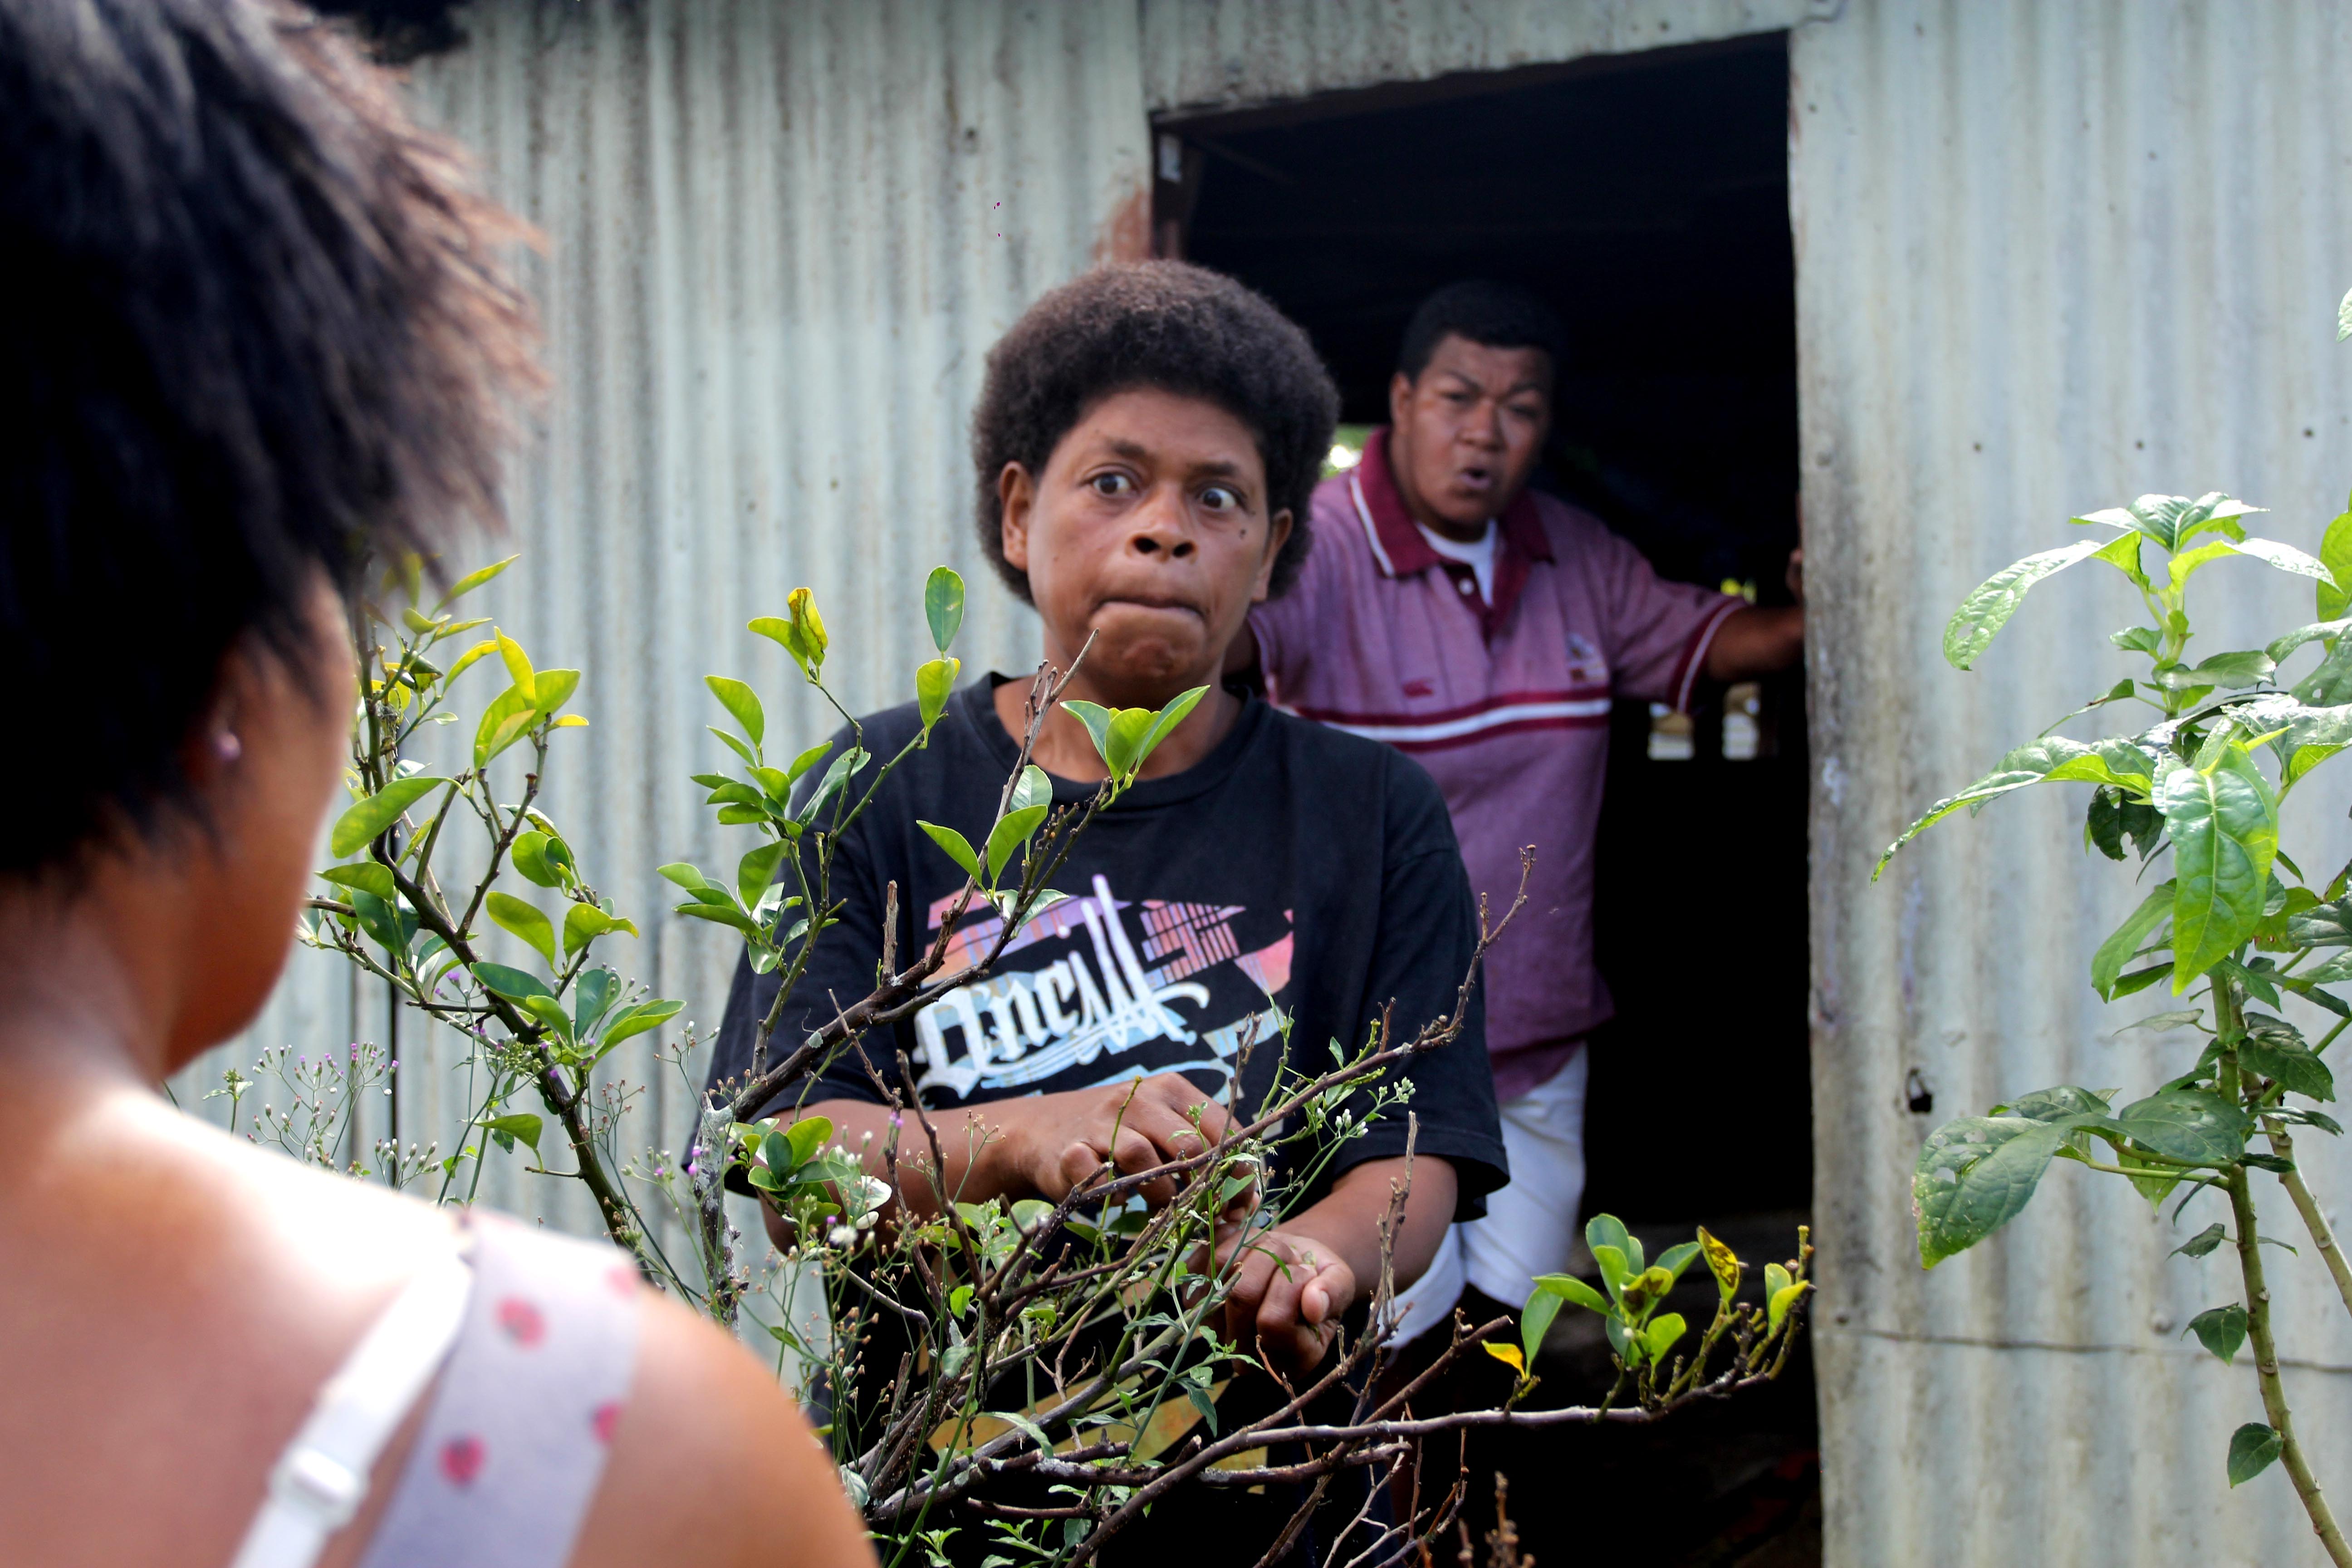 This image was one of a series featuring SFijian actors to illustrate stories about situations that can trigger gender violence in families. : Ali Rae CCBY4.0